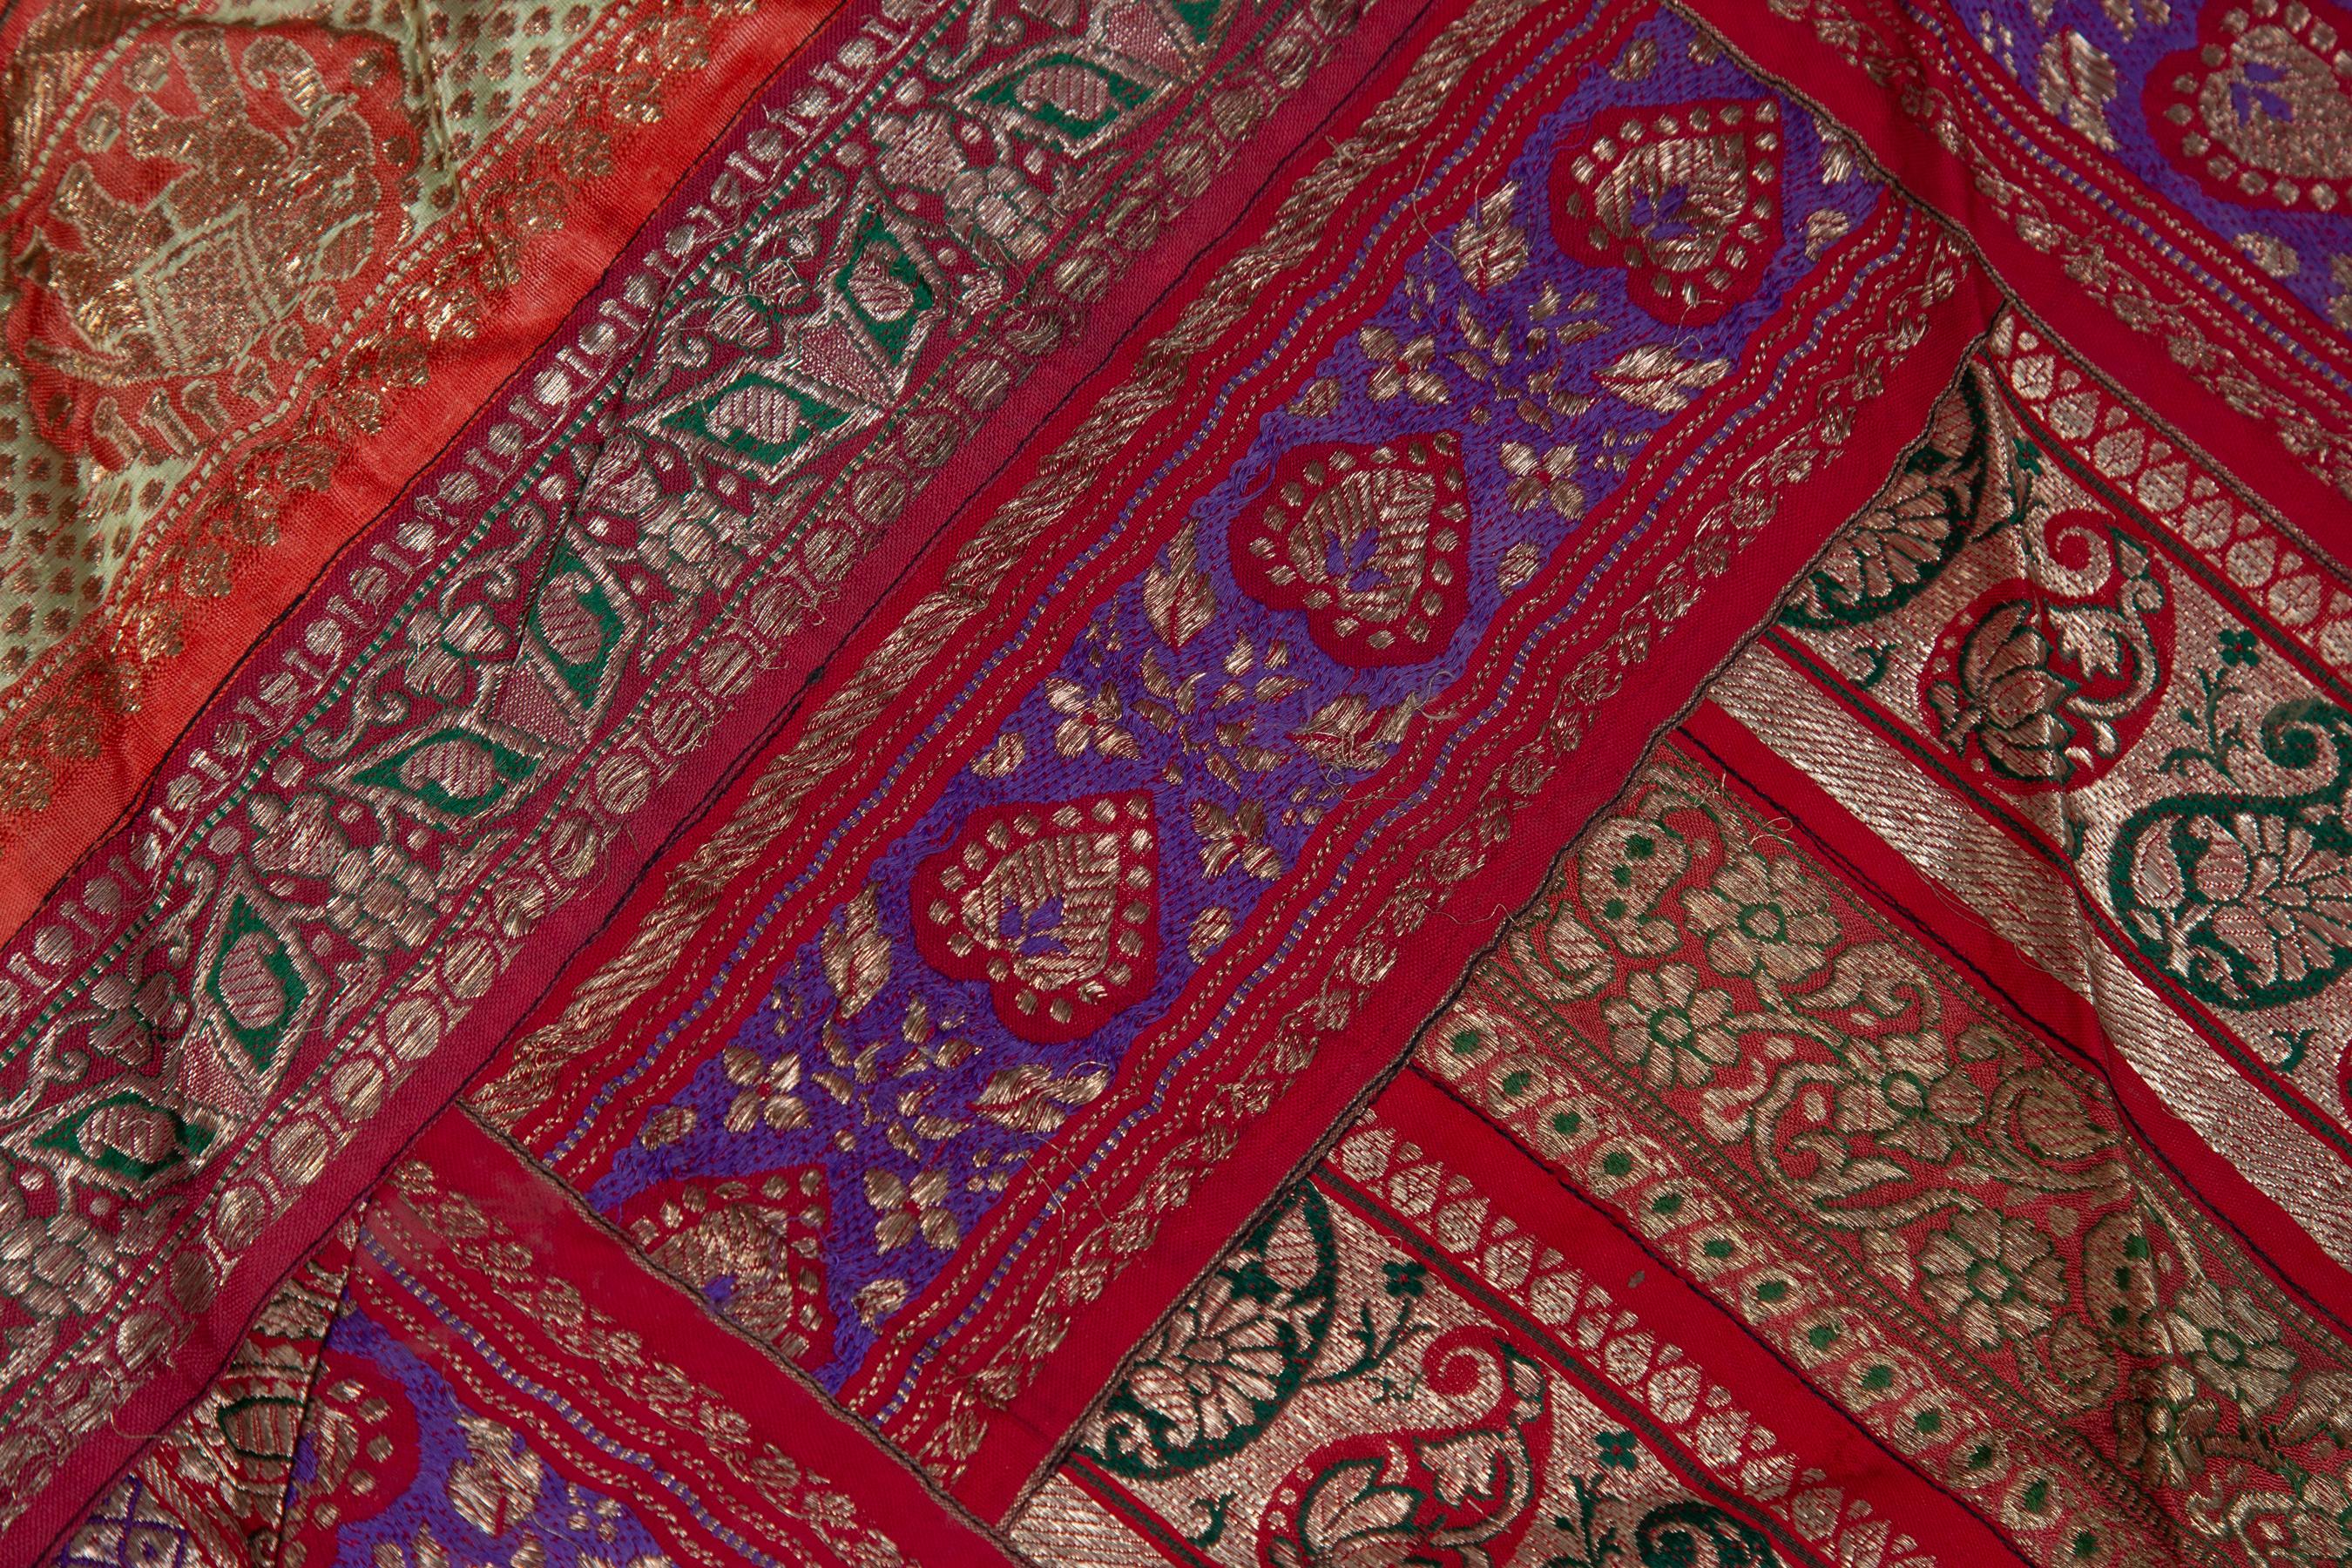 Vintage Indian Silk Embroidered Fabric with Red, Orange, Purple and Golden Tones For Sale 5